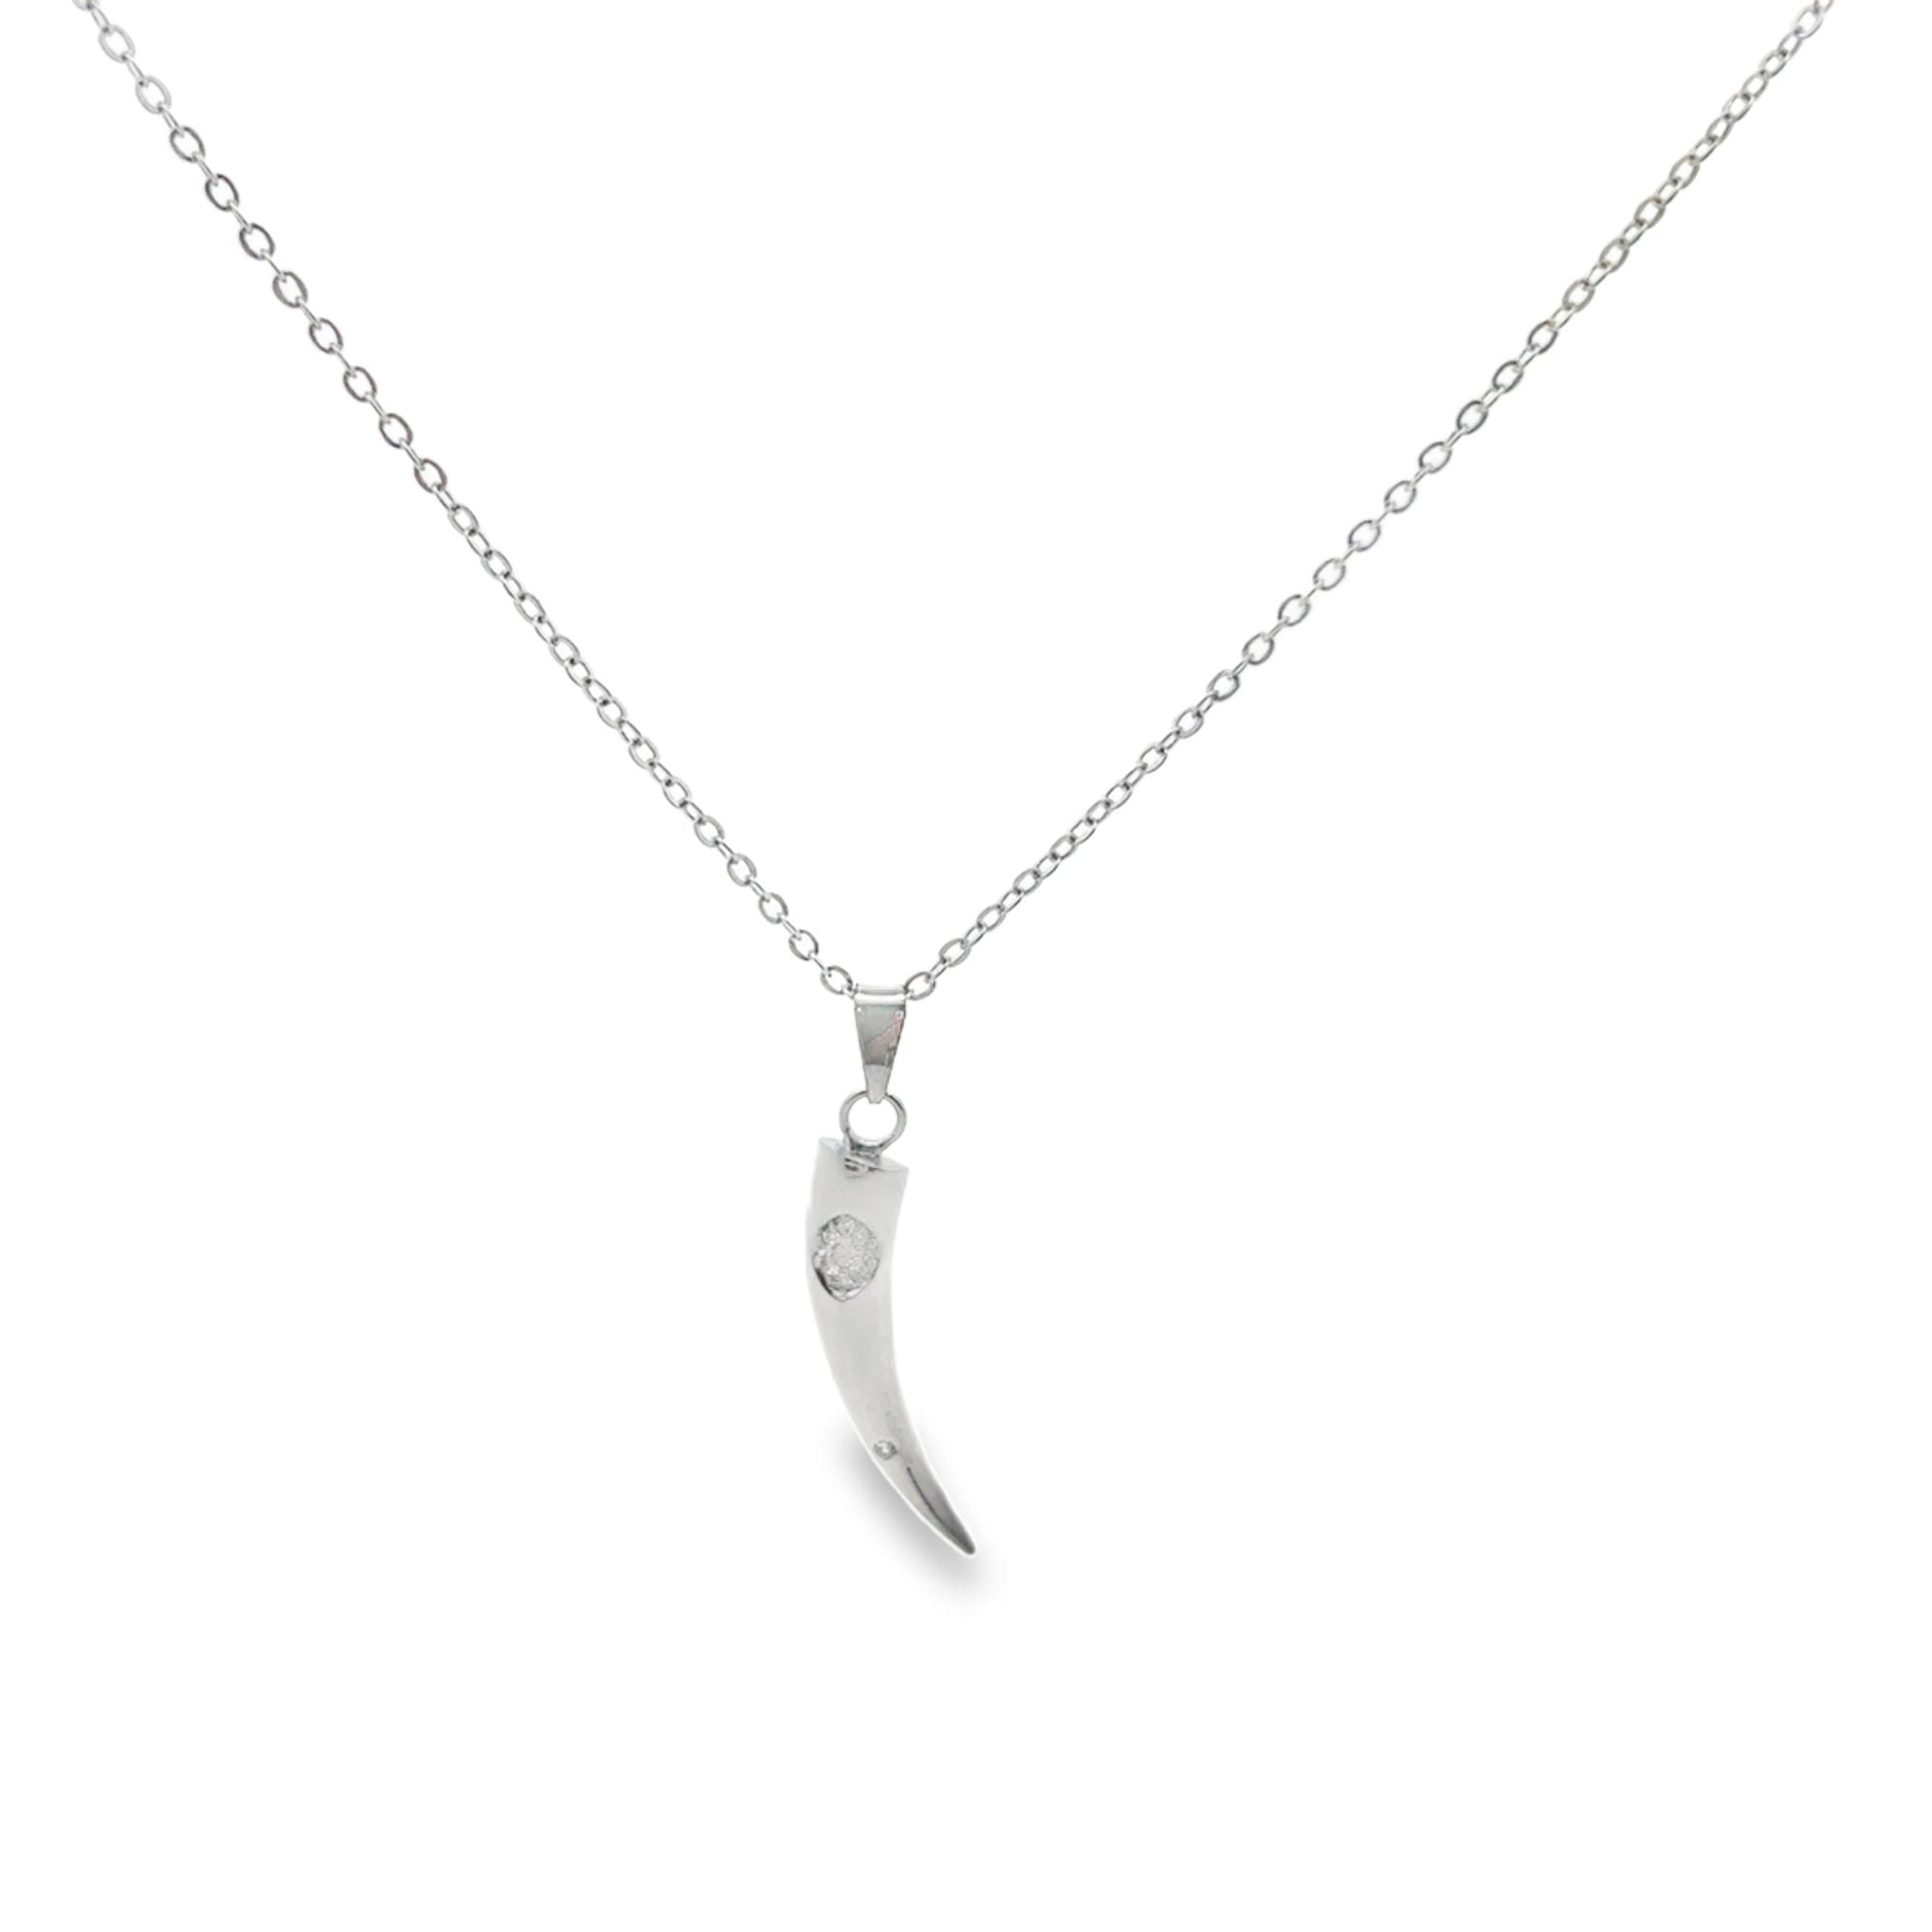 Horn Charm Necklace With CZ Stones